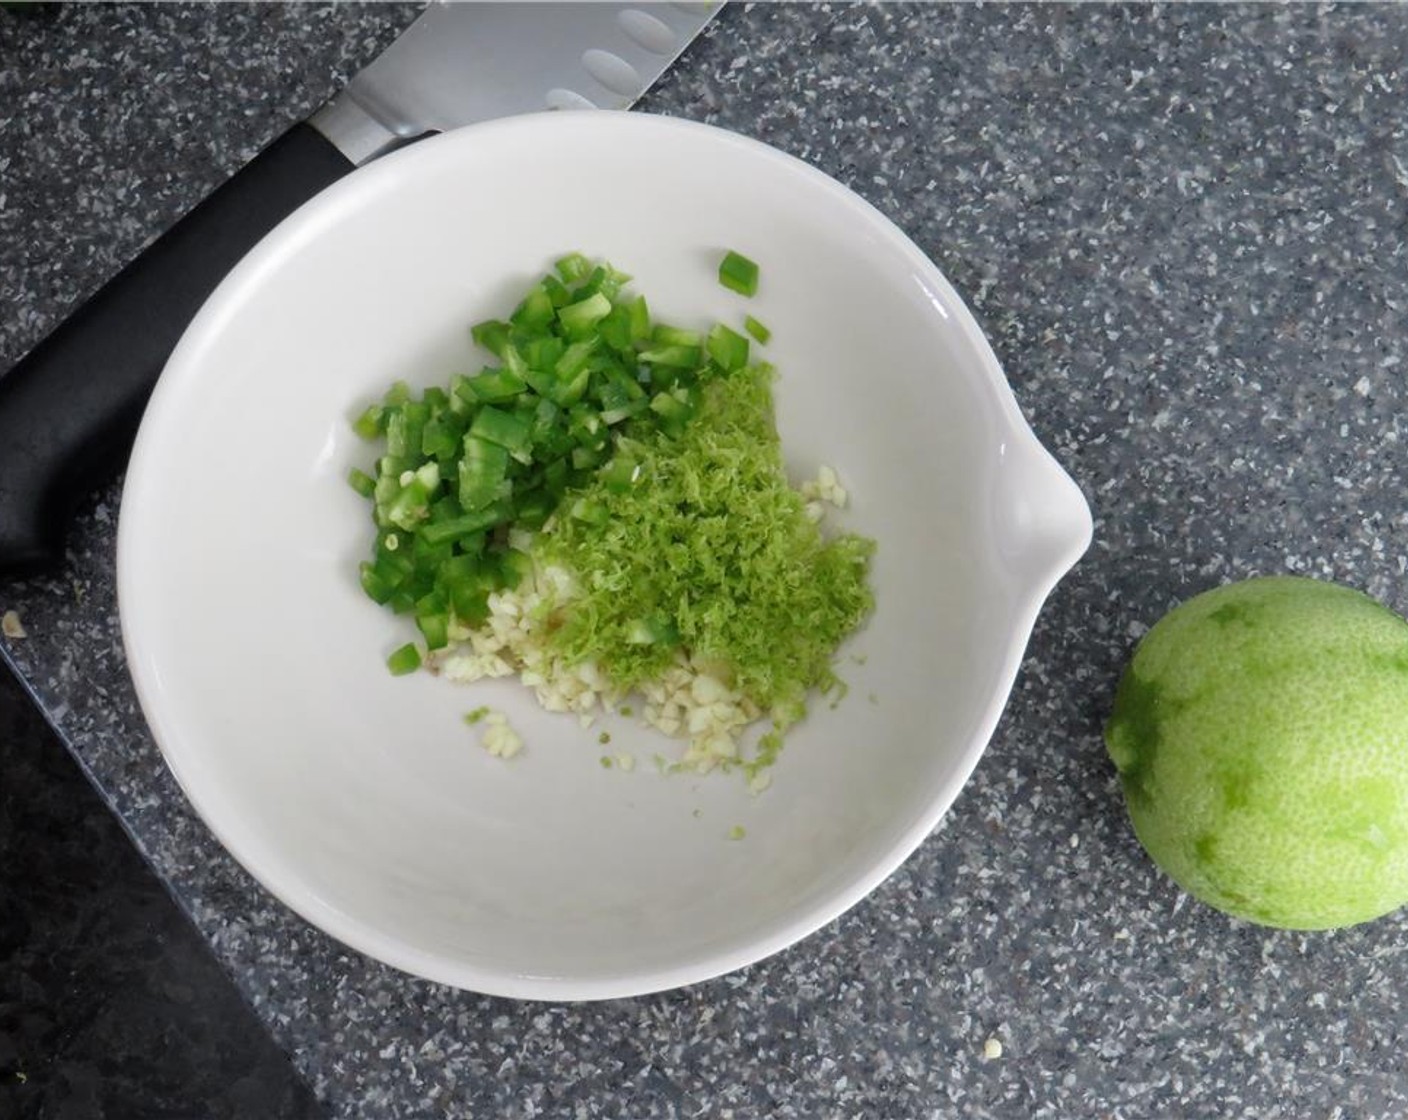 step 2 In a small bowl, combine Lime (1), Garlic (3 cloves), Fresh Cilantro (1/2 cup), Jalapeño Pepper (1/2), Ground Black Pepper (1/2 tsp), Kosher Salt (1/2 tsp), and Olive Oil (1/4 cup). Stir to combine and set marinade aside.